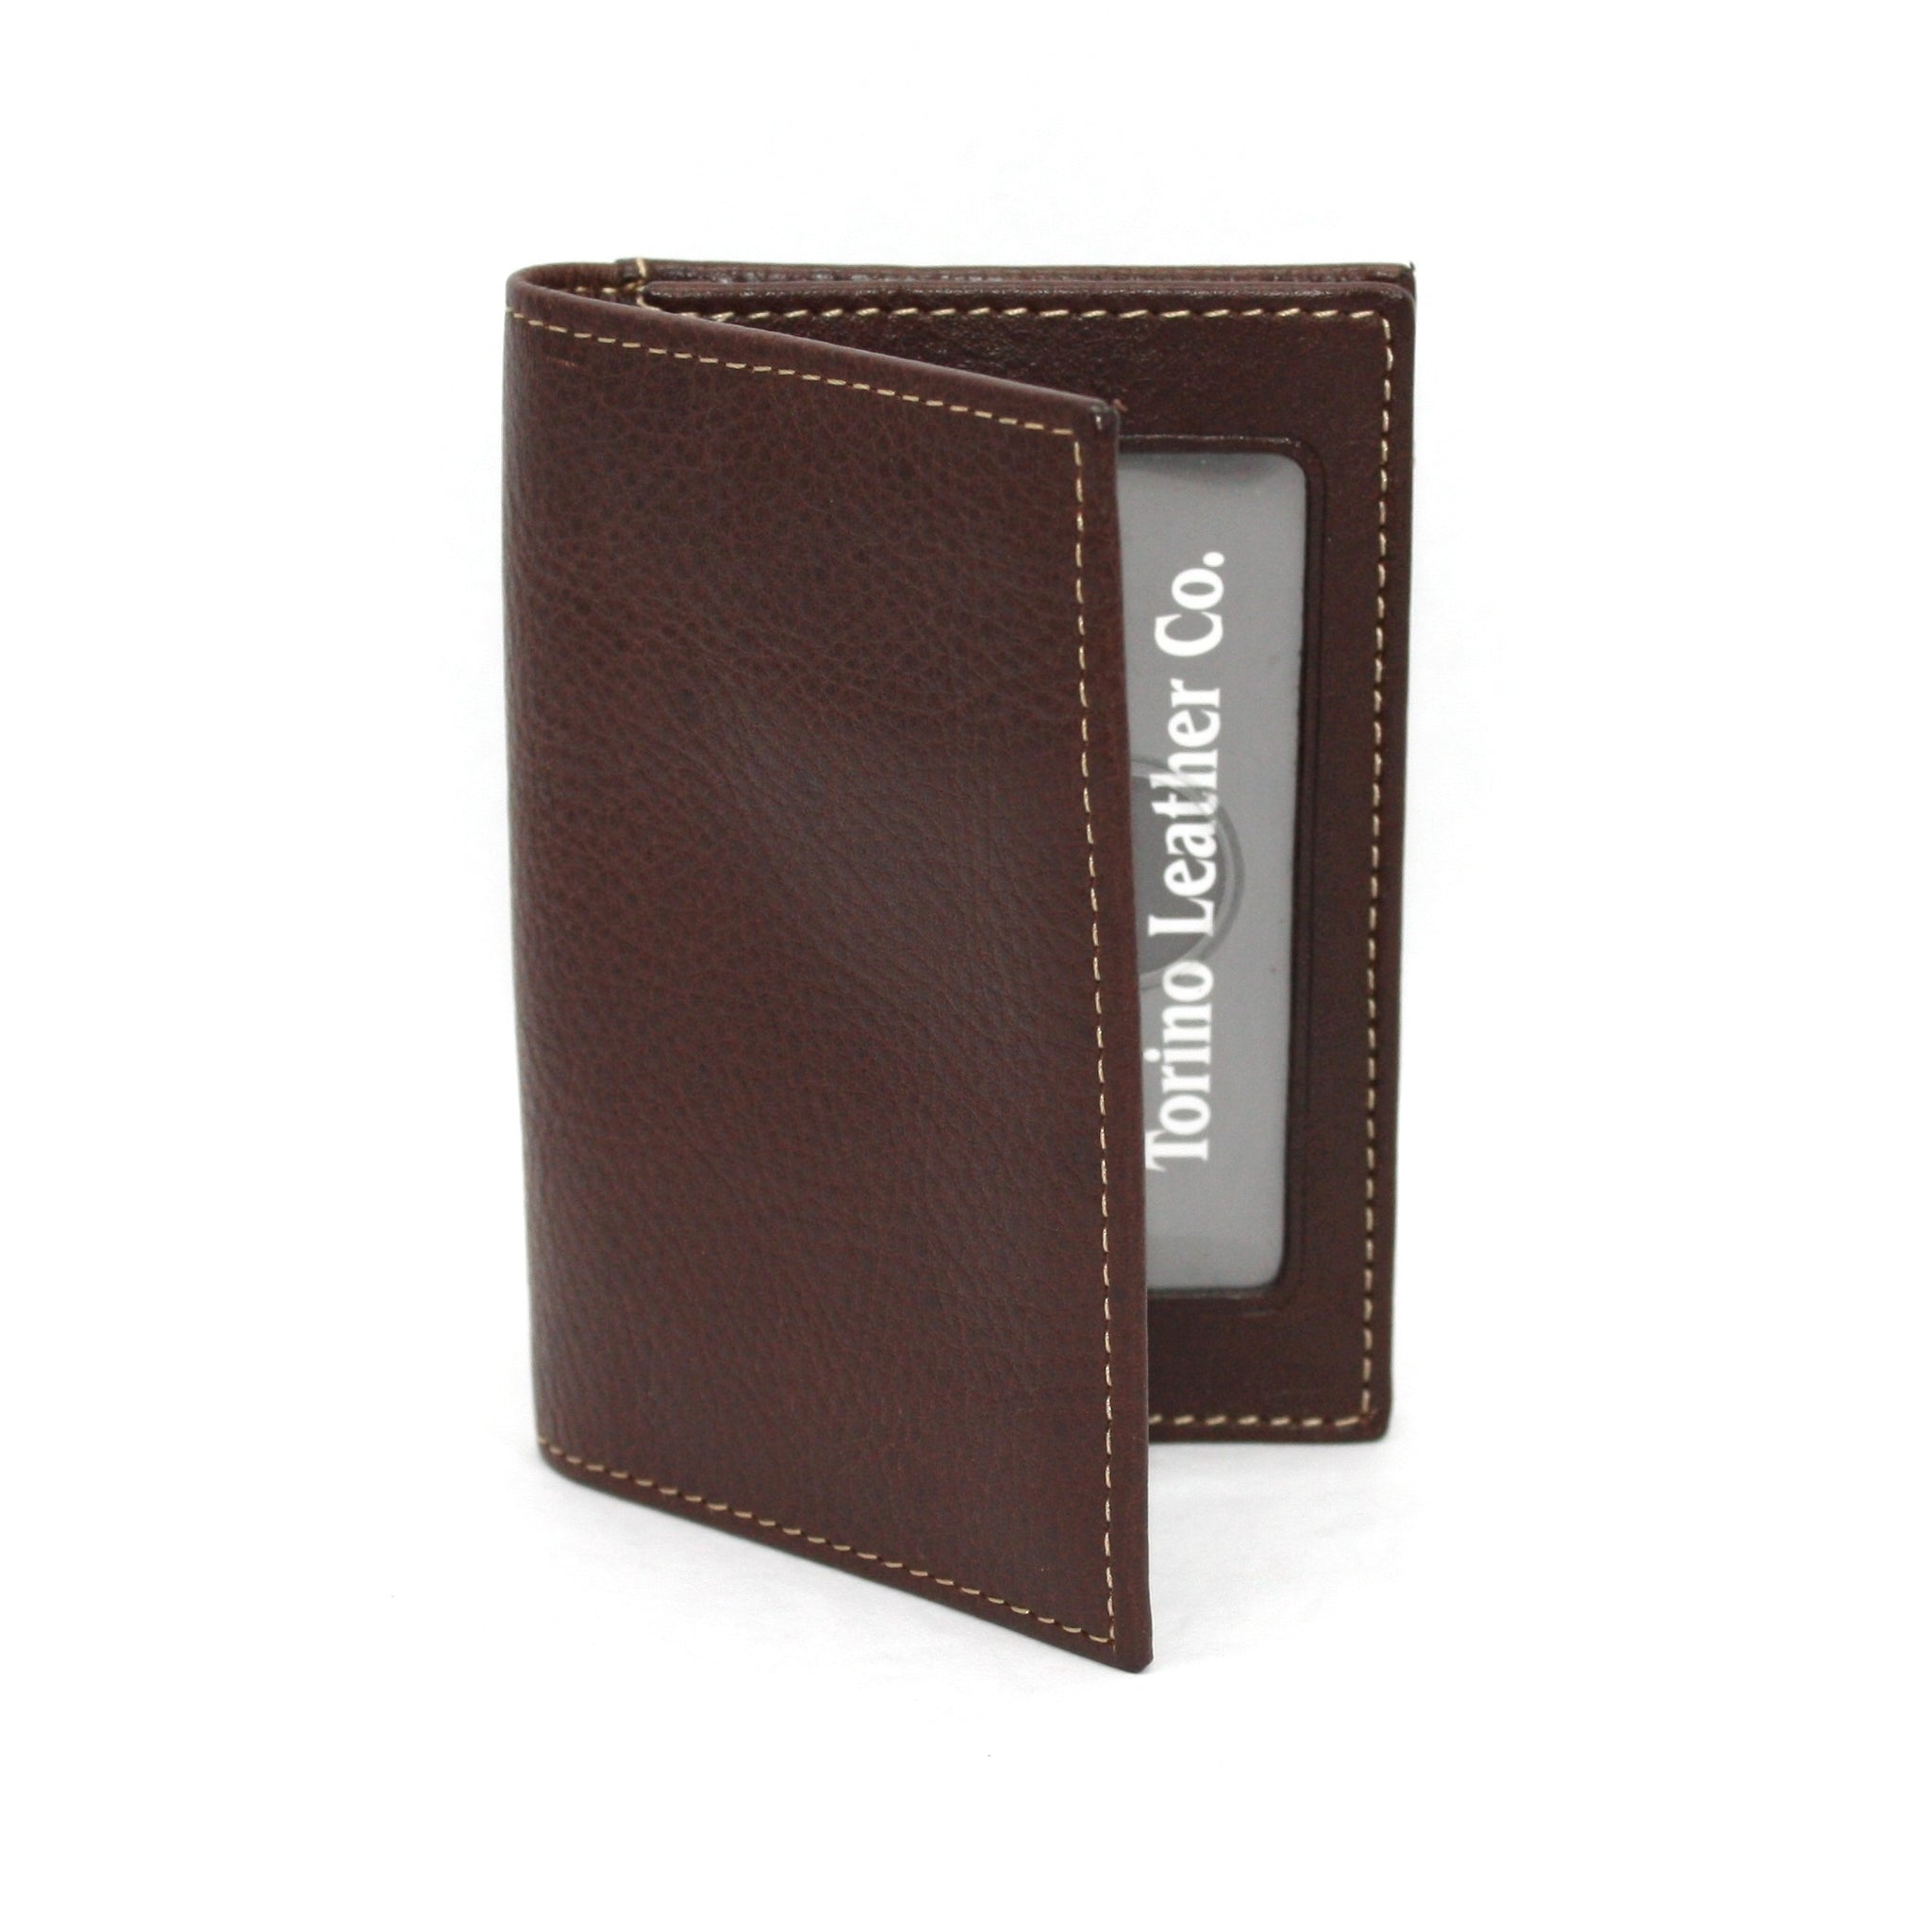 Tumbled Glove Leather Gusseted Card Case - Brown